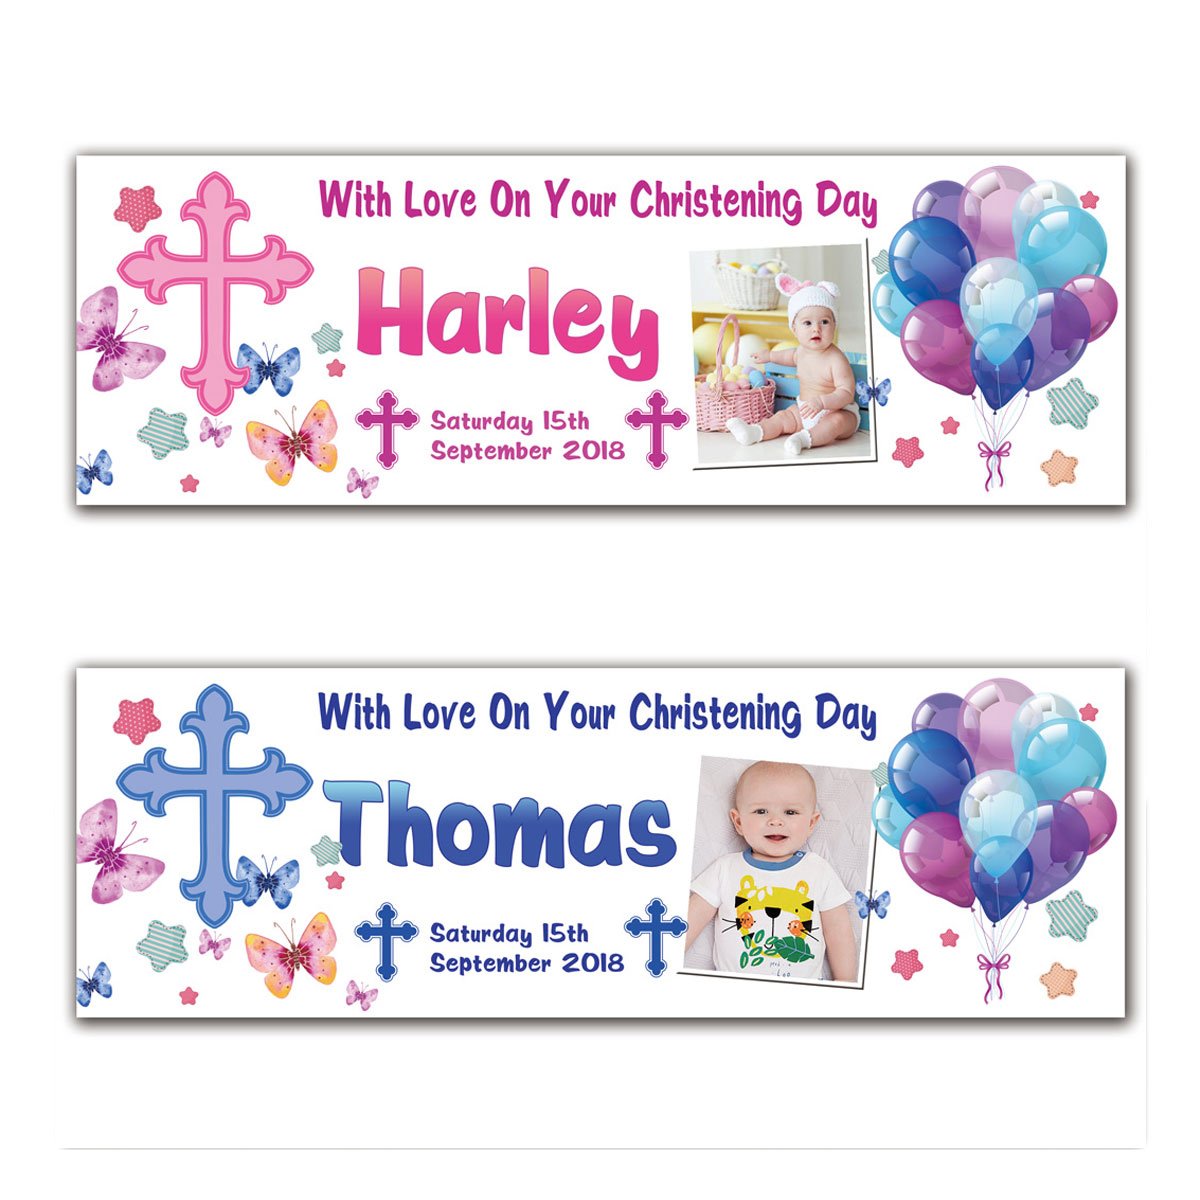 personalised-baptism-party-banners-2-pieces-from-6-49-free-post